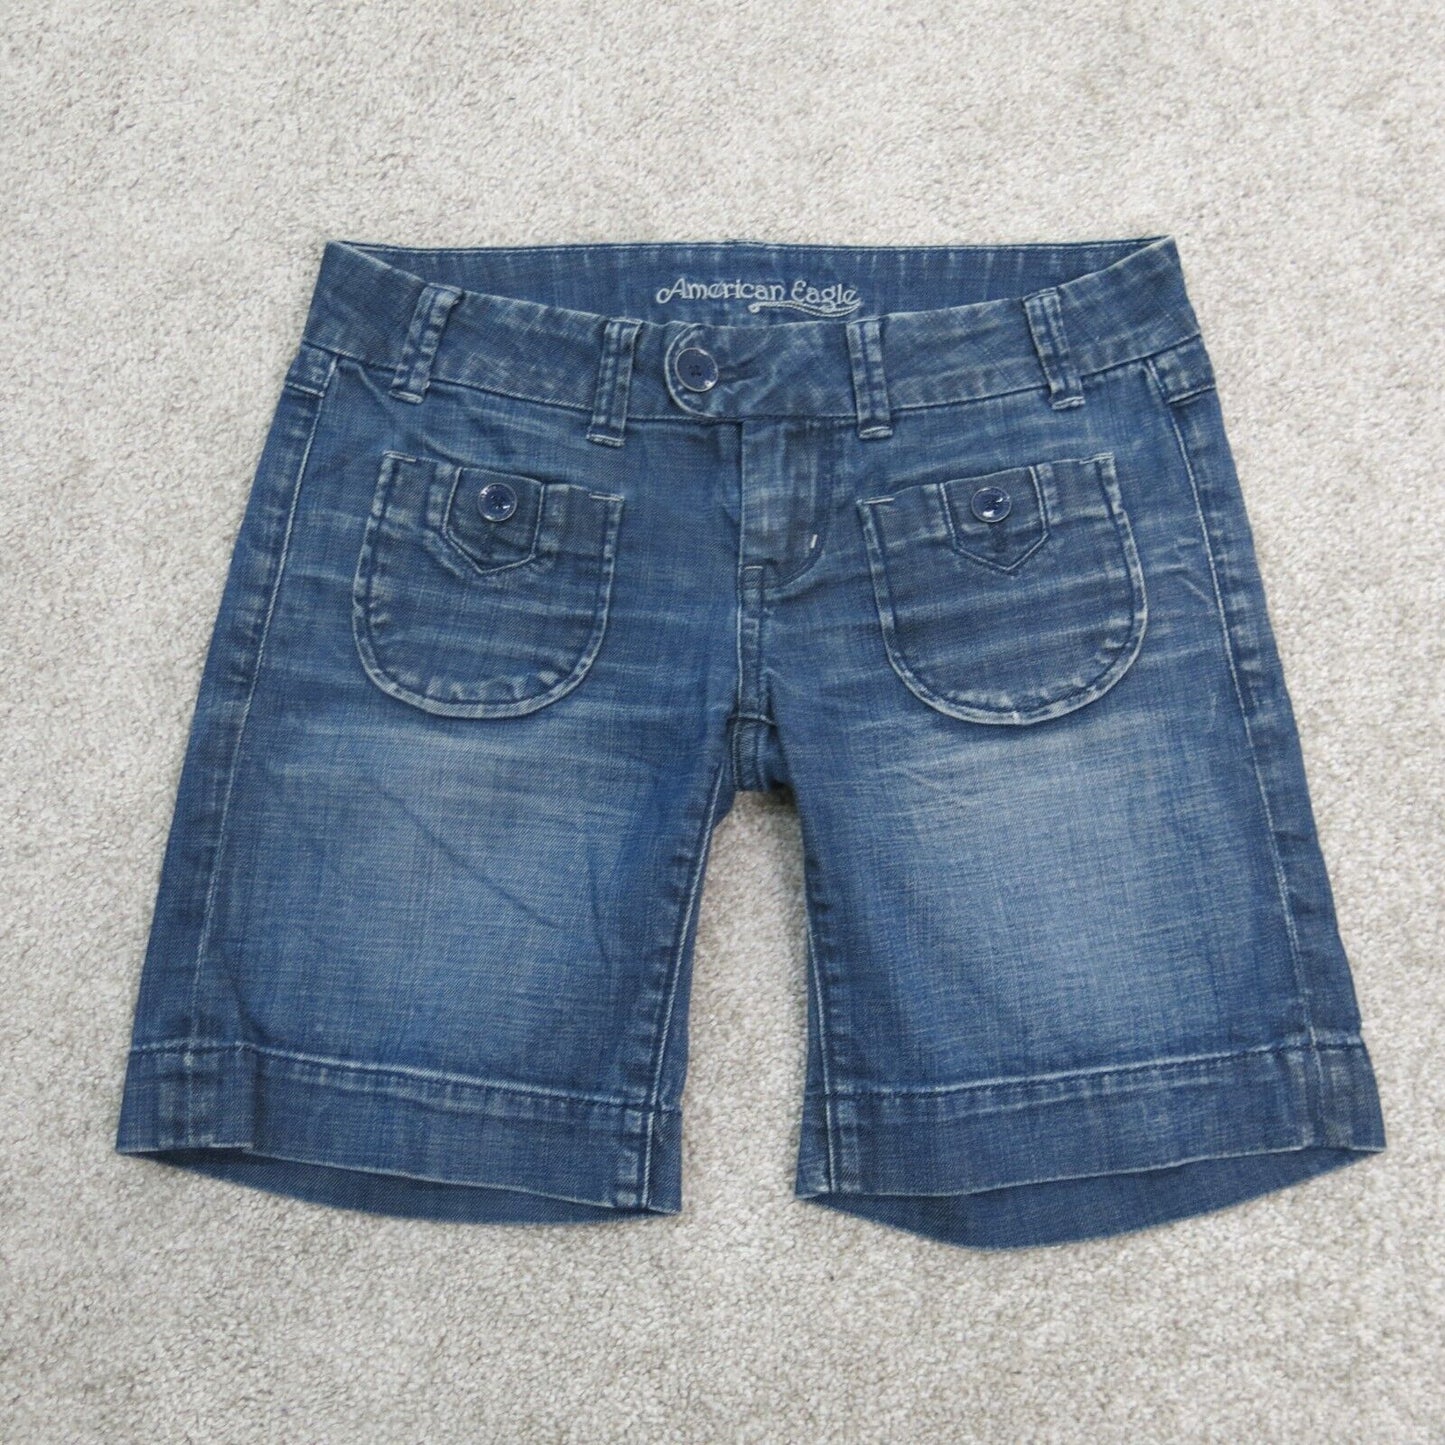 American Eagle Womens Denim Jeans Shorts Low Rise Flat Font Solid Blue Size W30